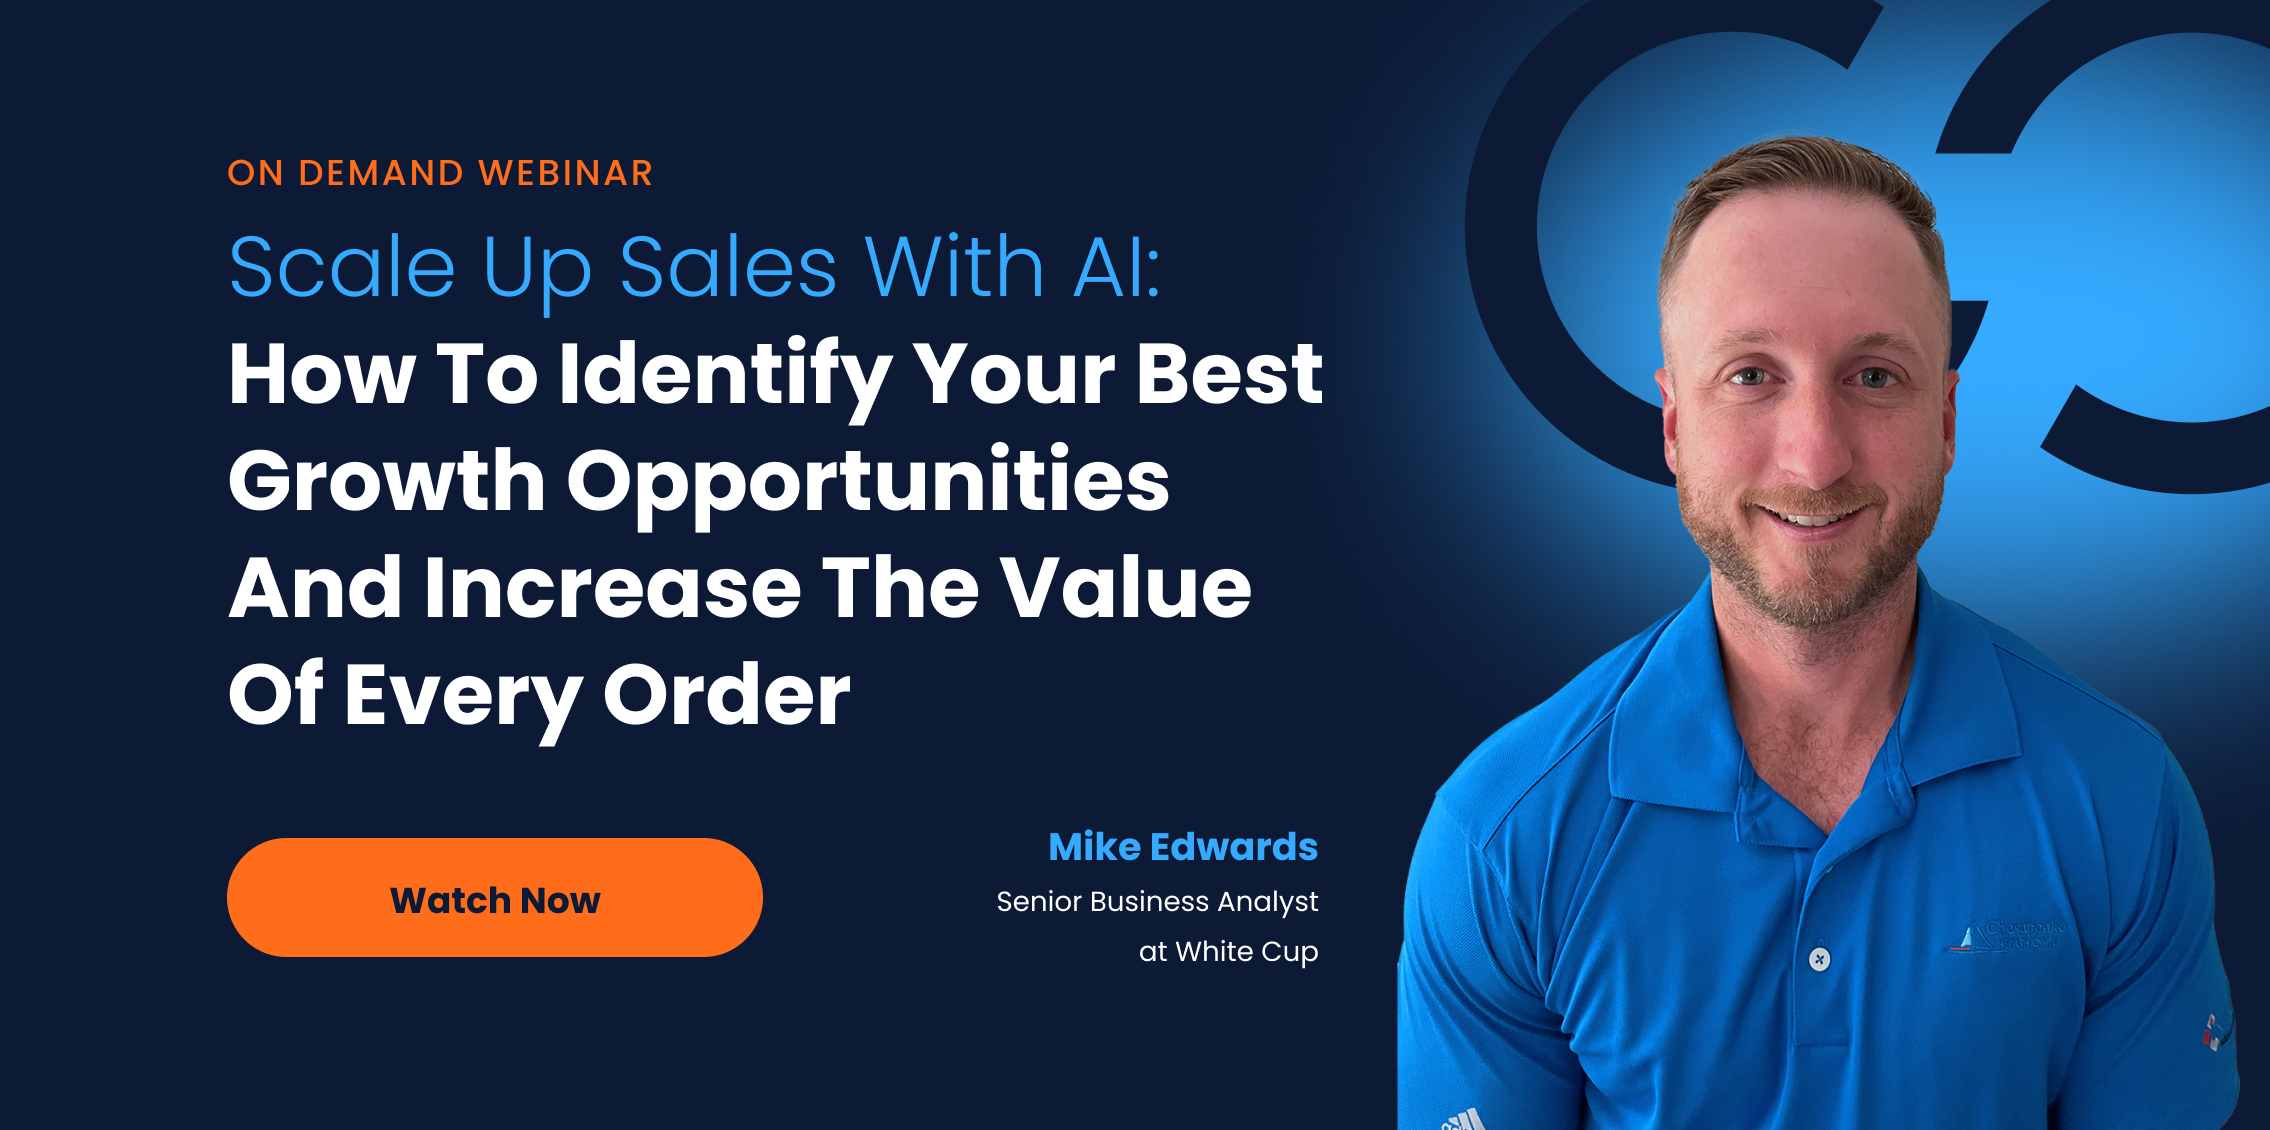 Scale Up Sales With AI-How To Identify Your Best Growth Opportunities